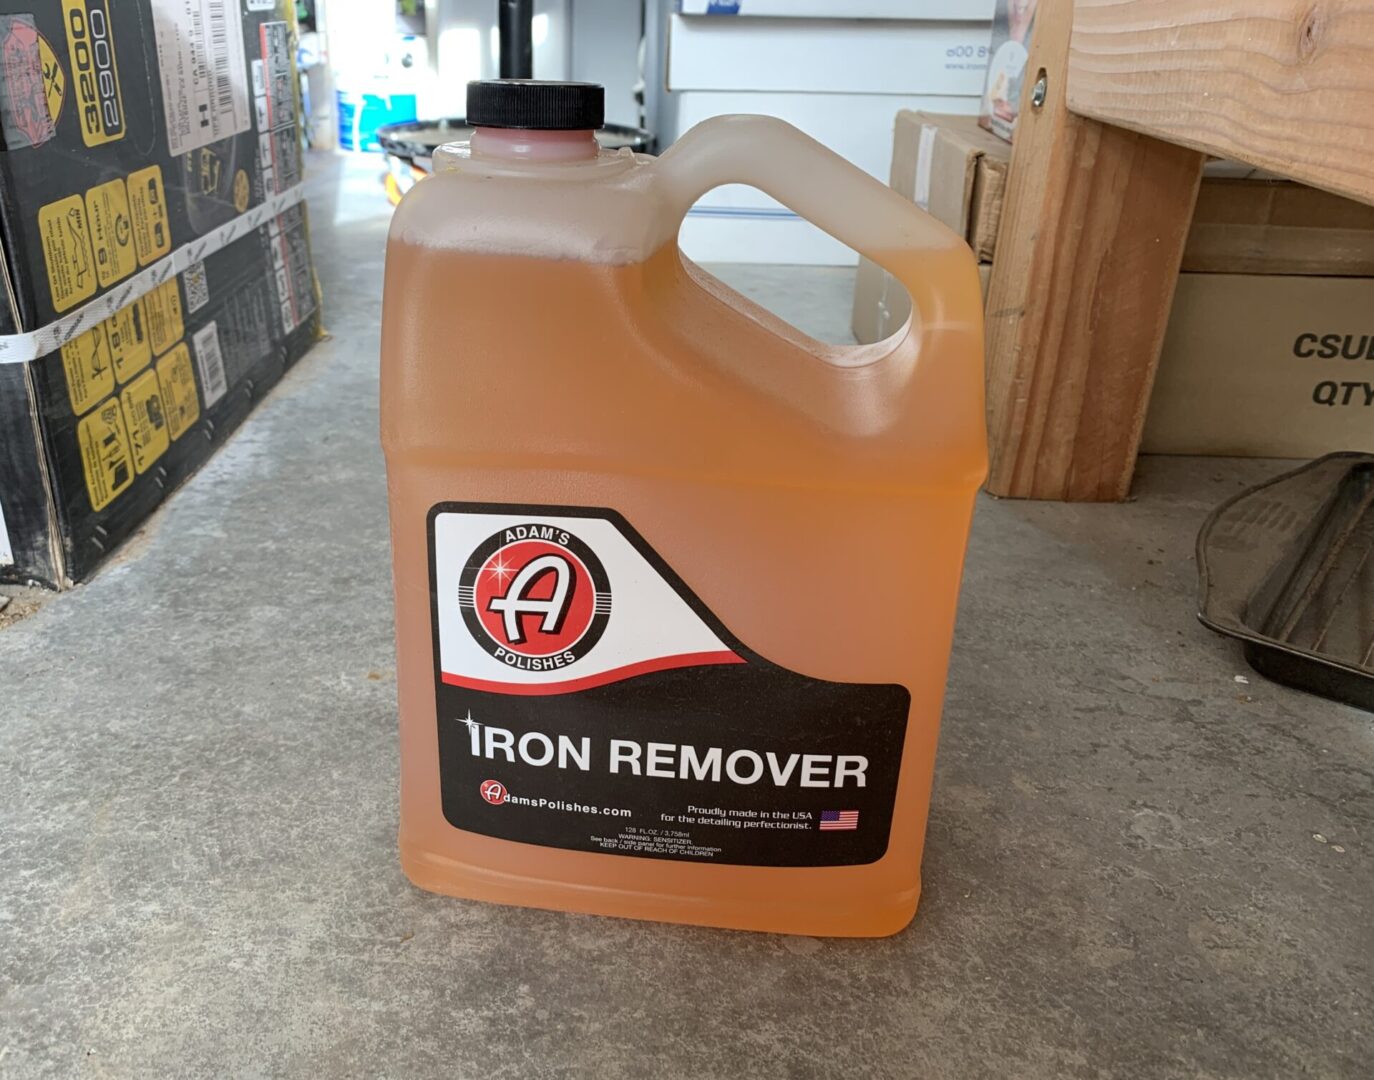 Adam's Iron Remover Review - The Track Ahead